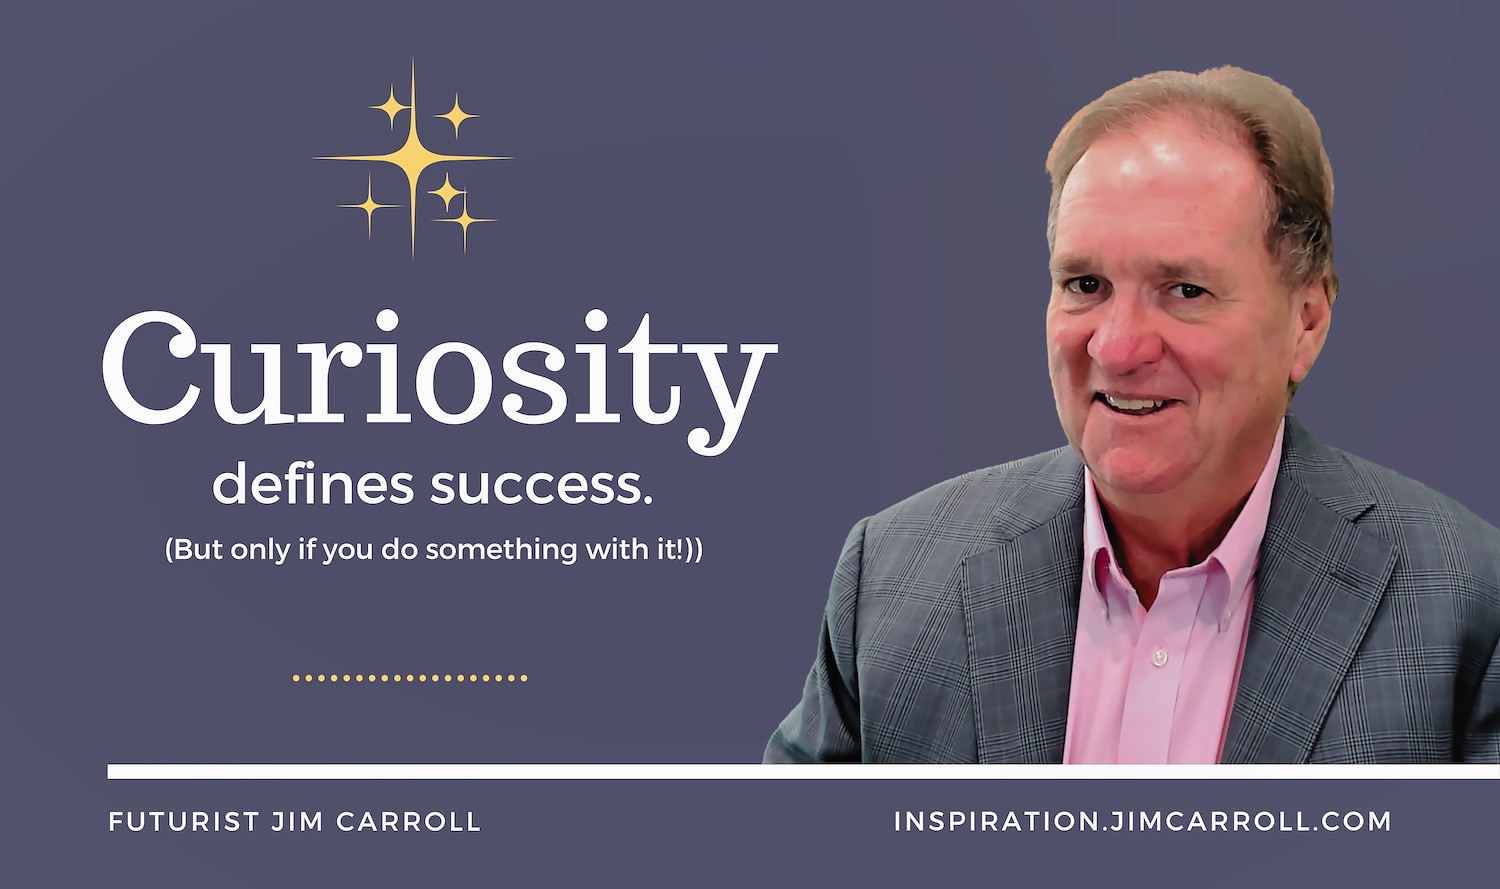 "Curiosity defines success. (But only if you do something with it!)" - Futurist Jim Carroll